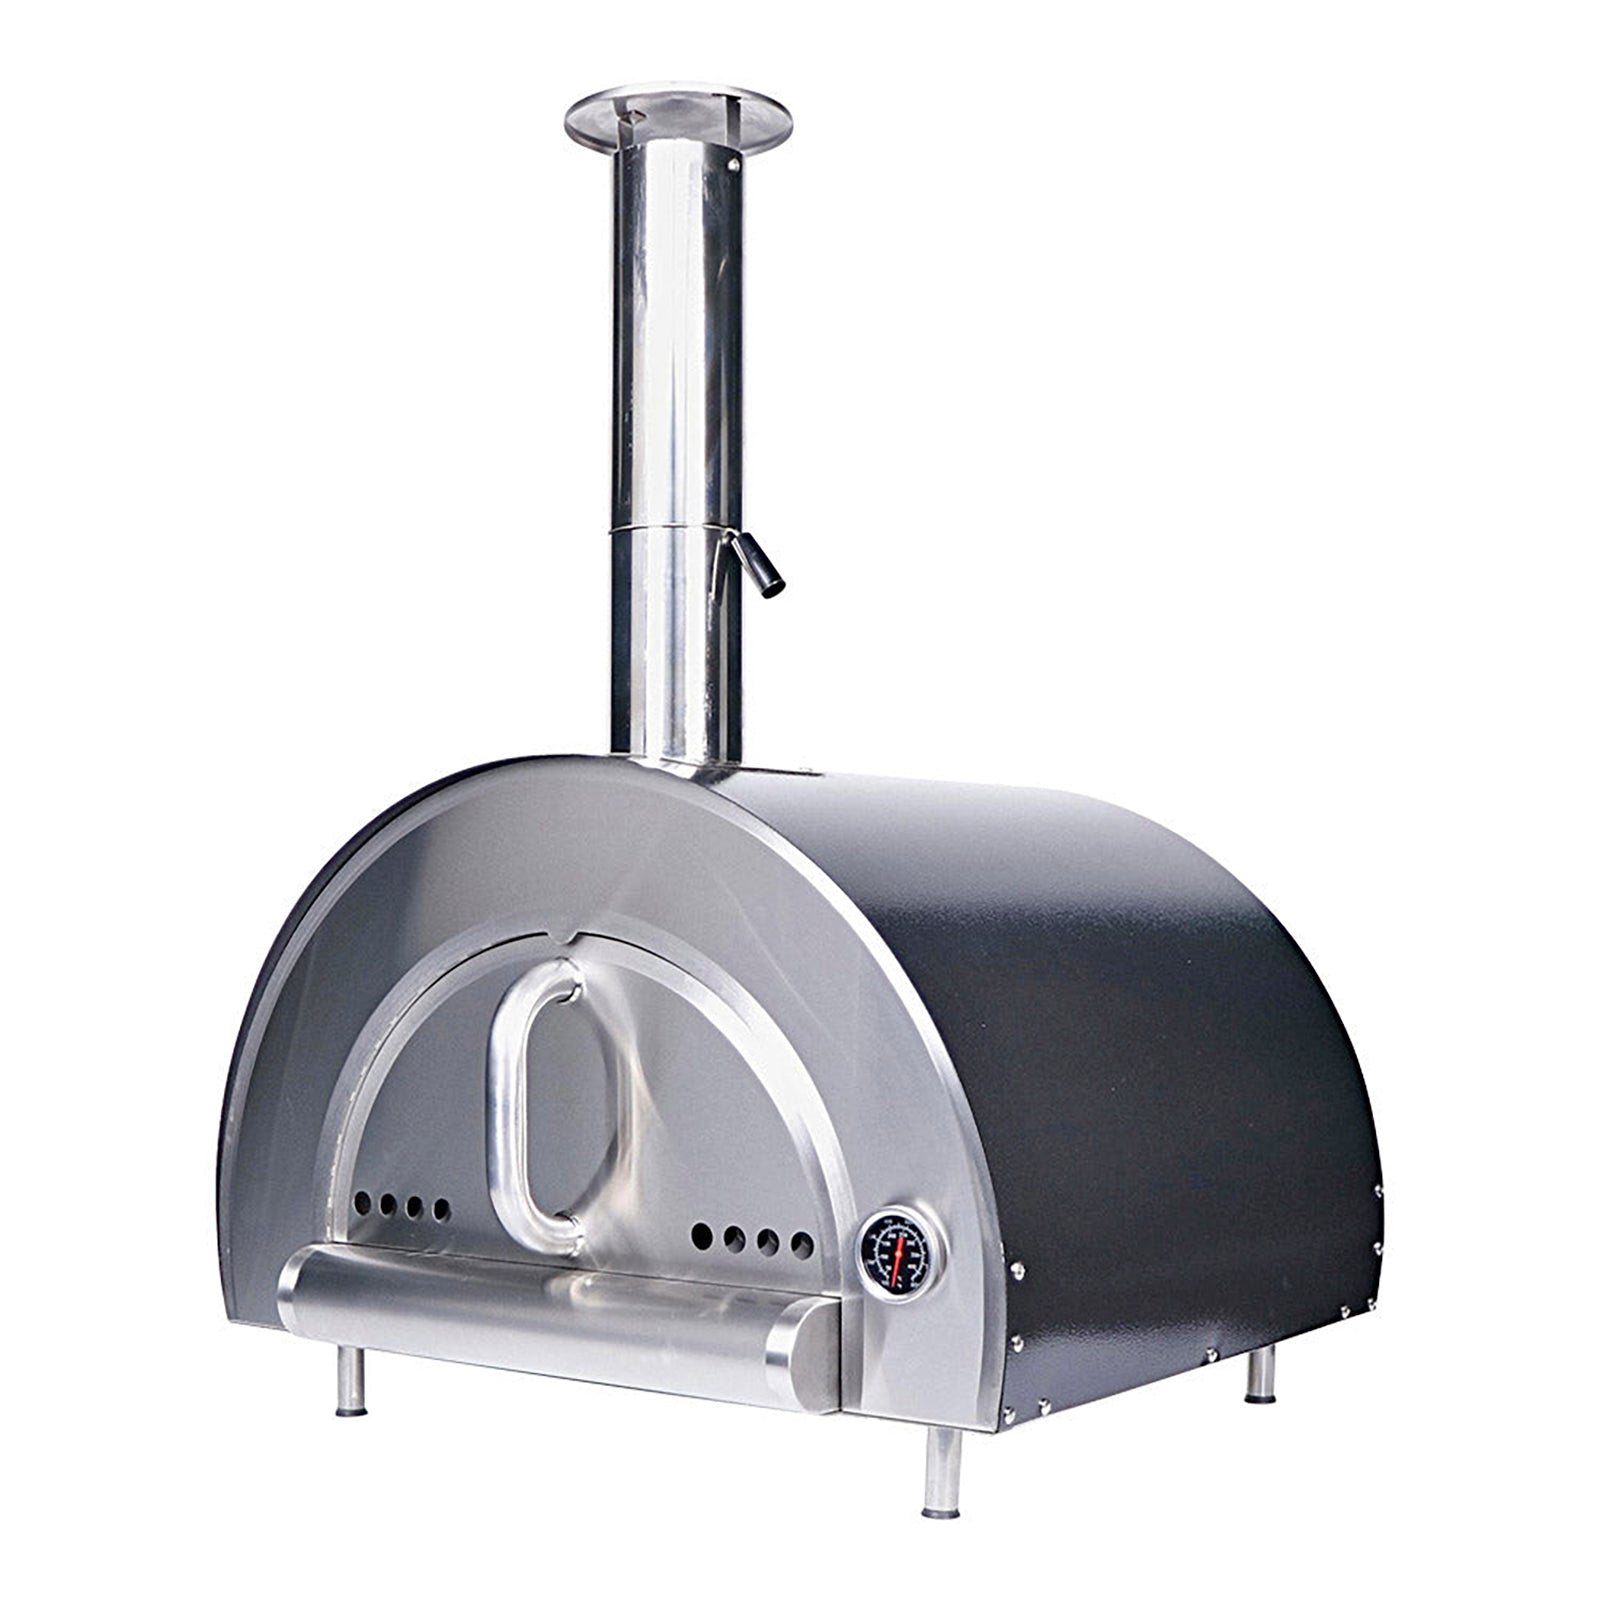 Smart Built-In Wood Fired Pizza Oven in Black & Stainless Steel Finish